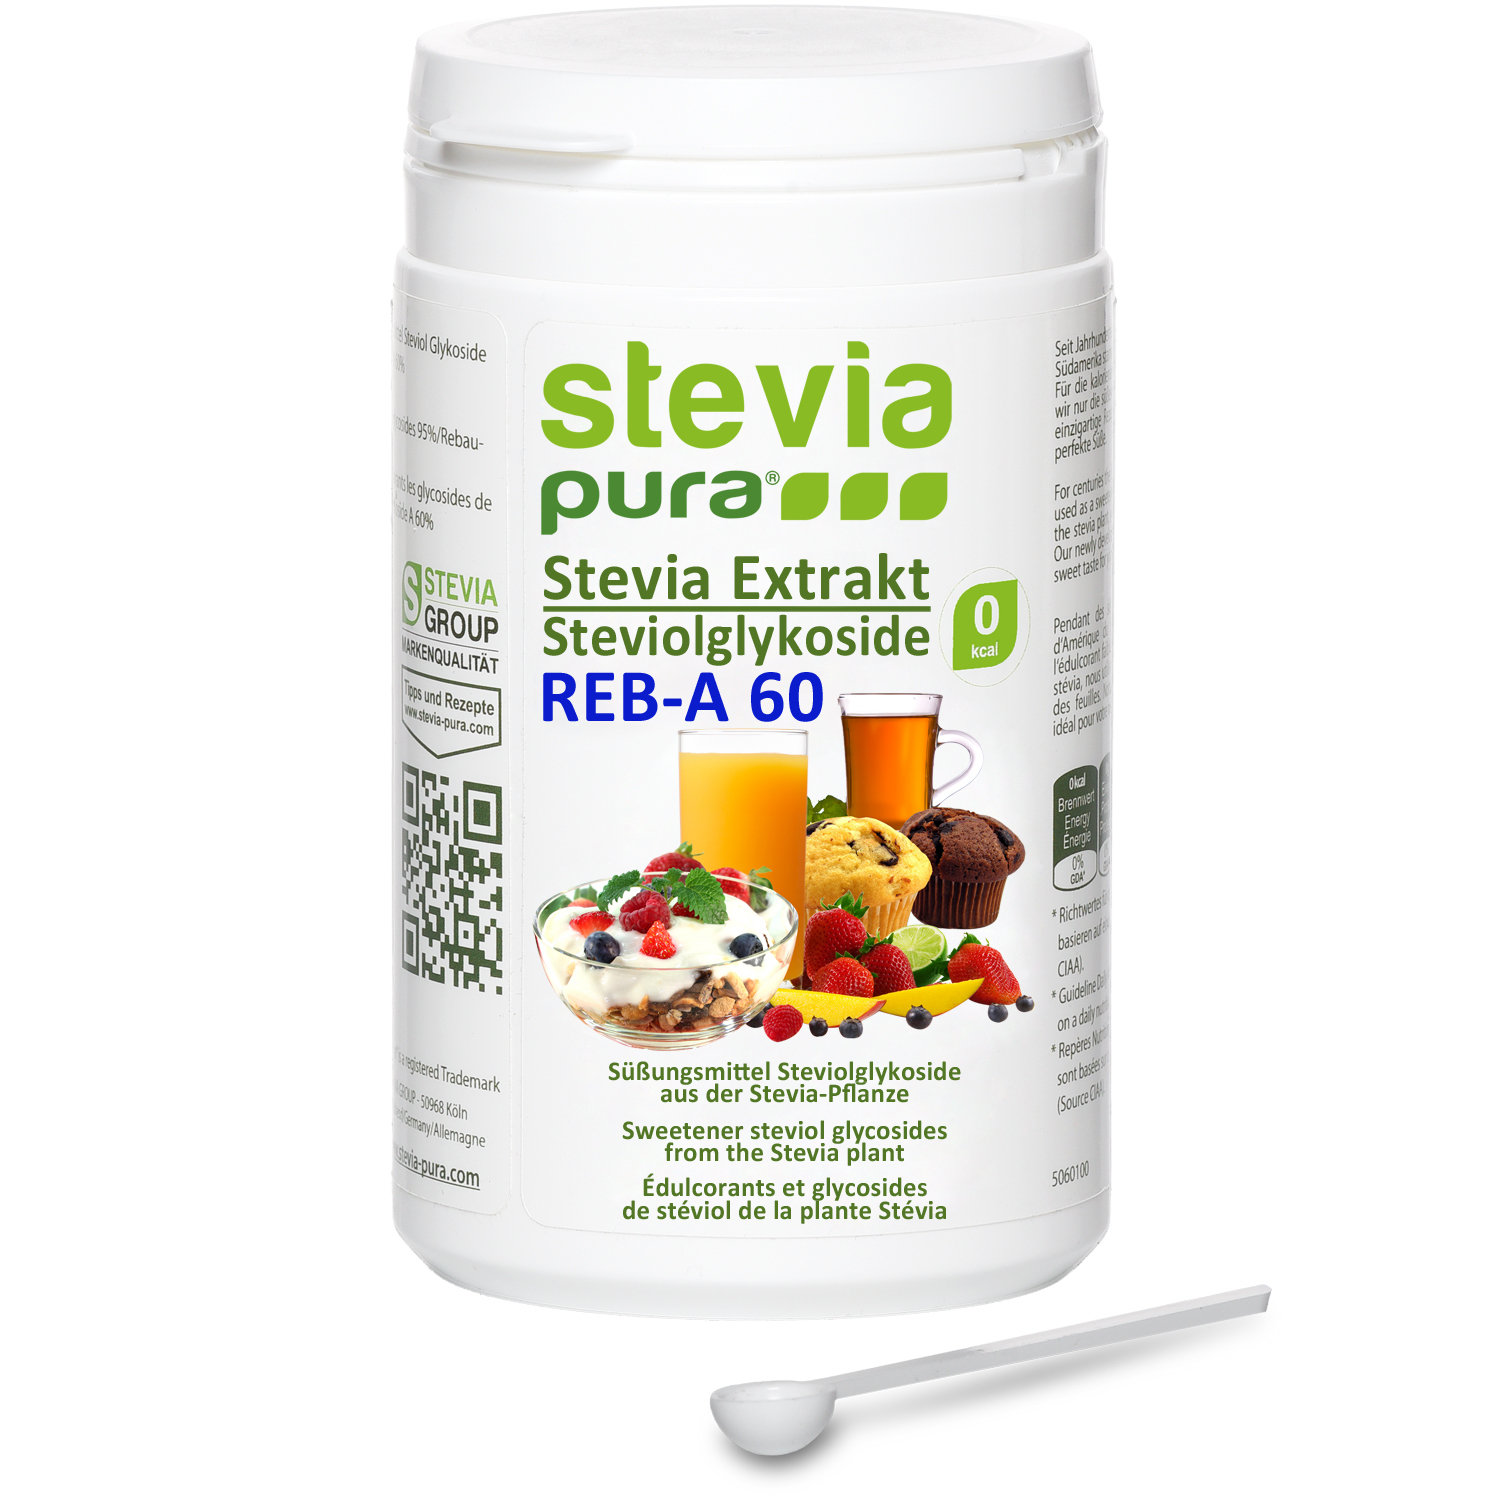 Buy Stevia Extract Powder without additives